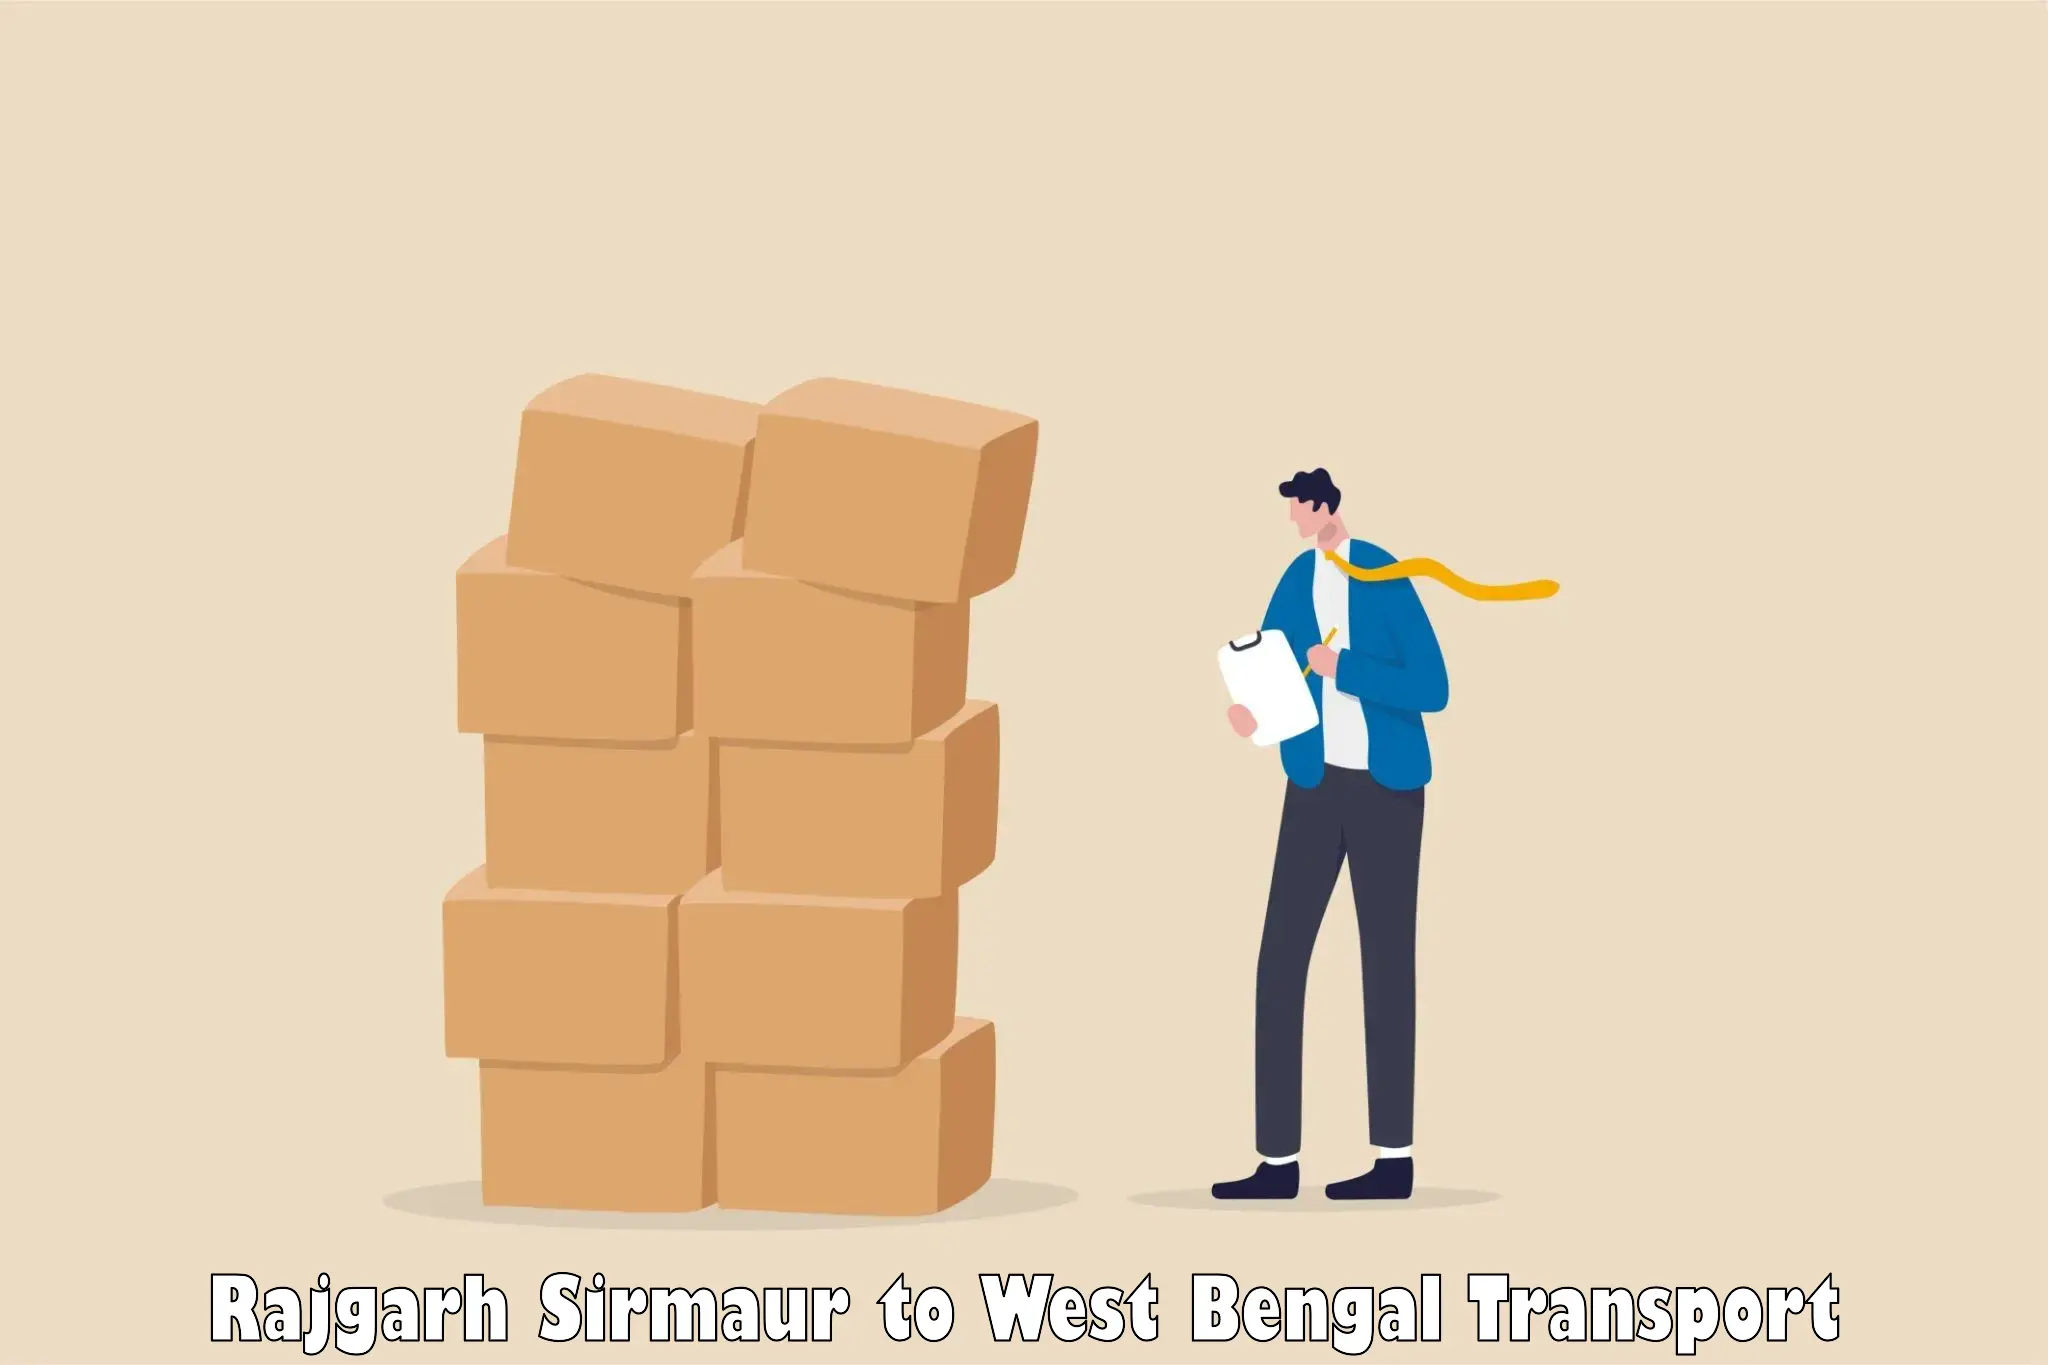 Container transport service in Rajgarh Sirmaur to The University of Burdwan Barddhaman